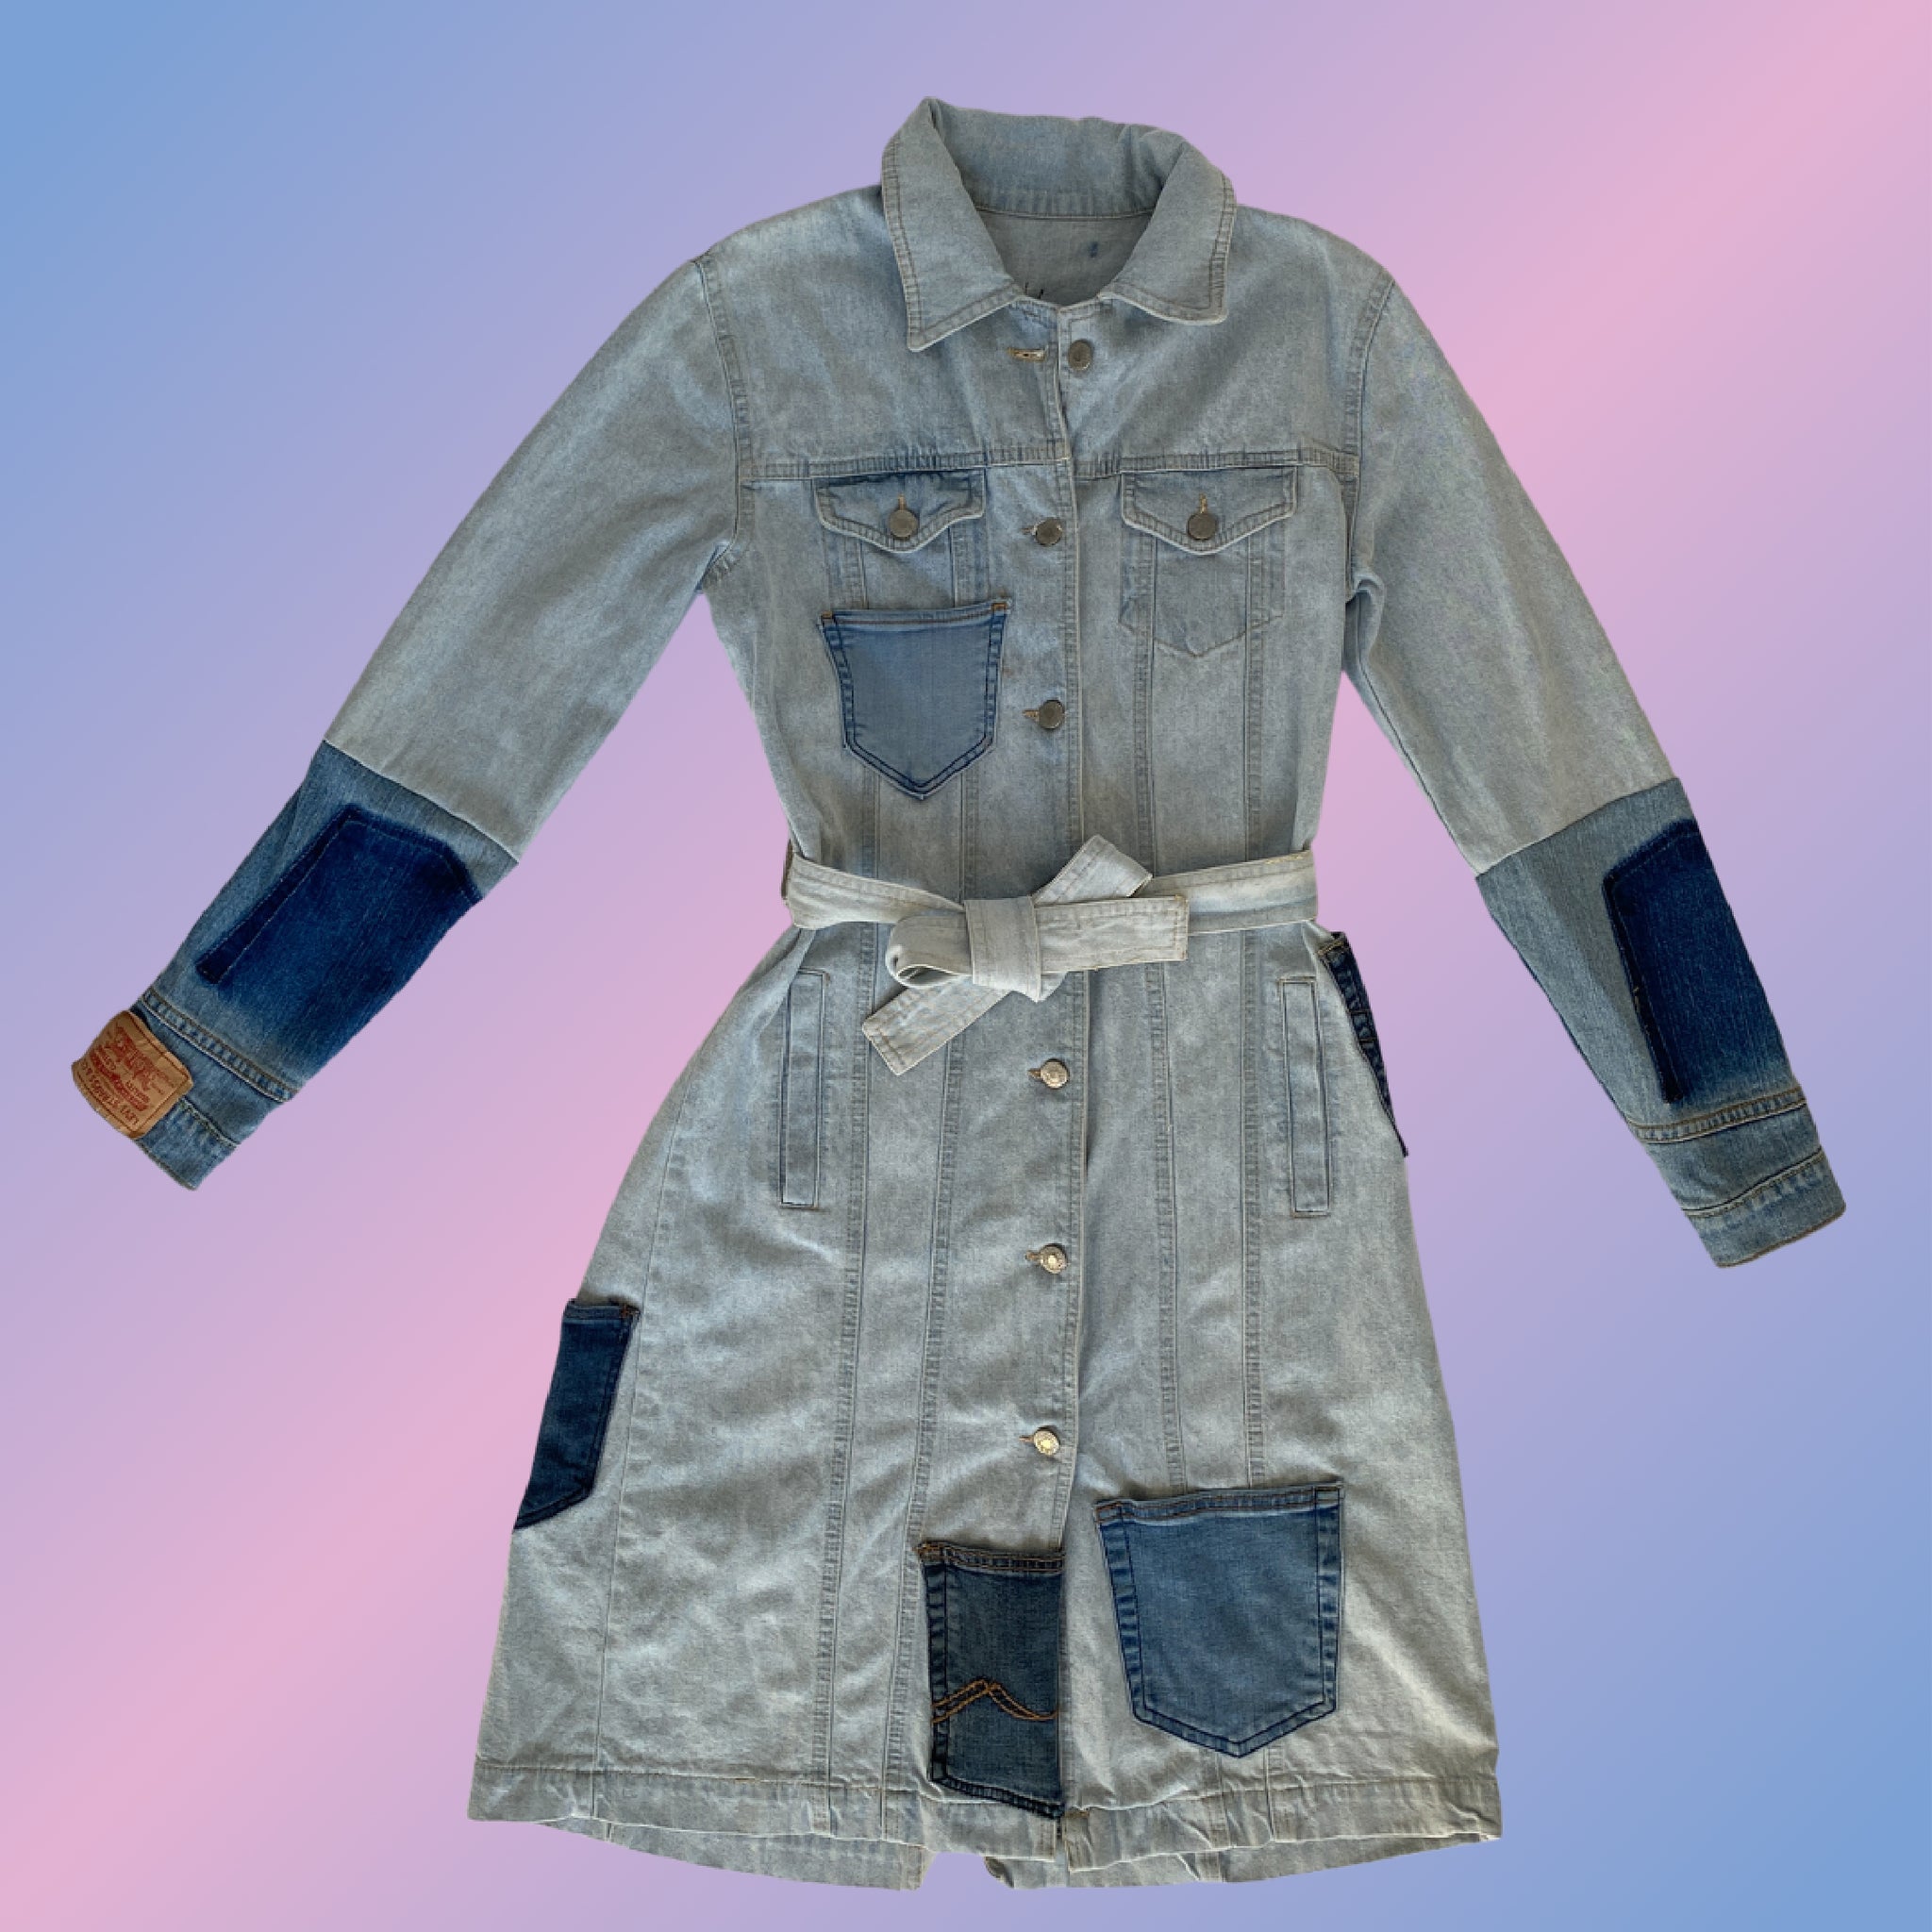 The pocket trench